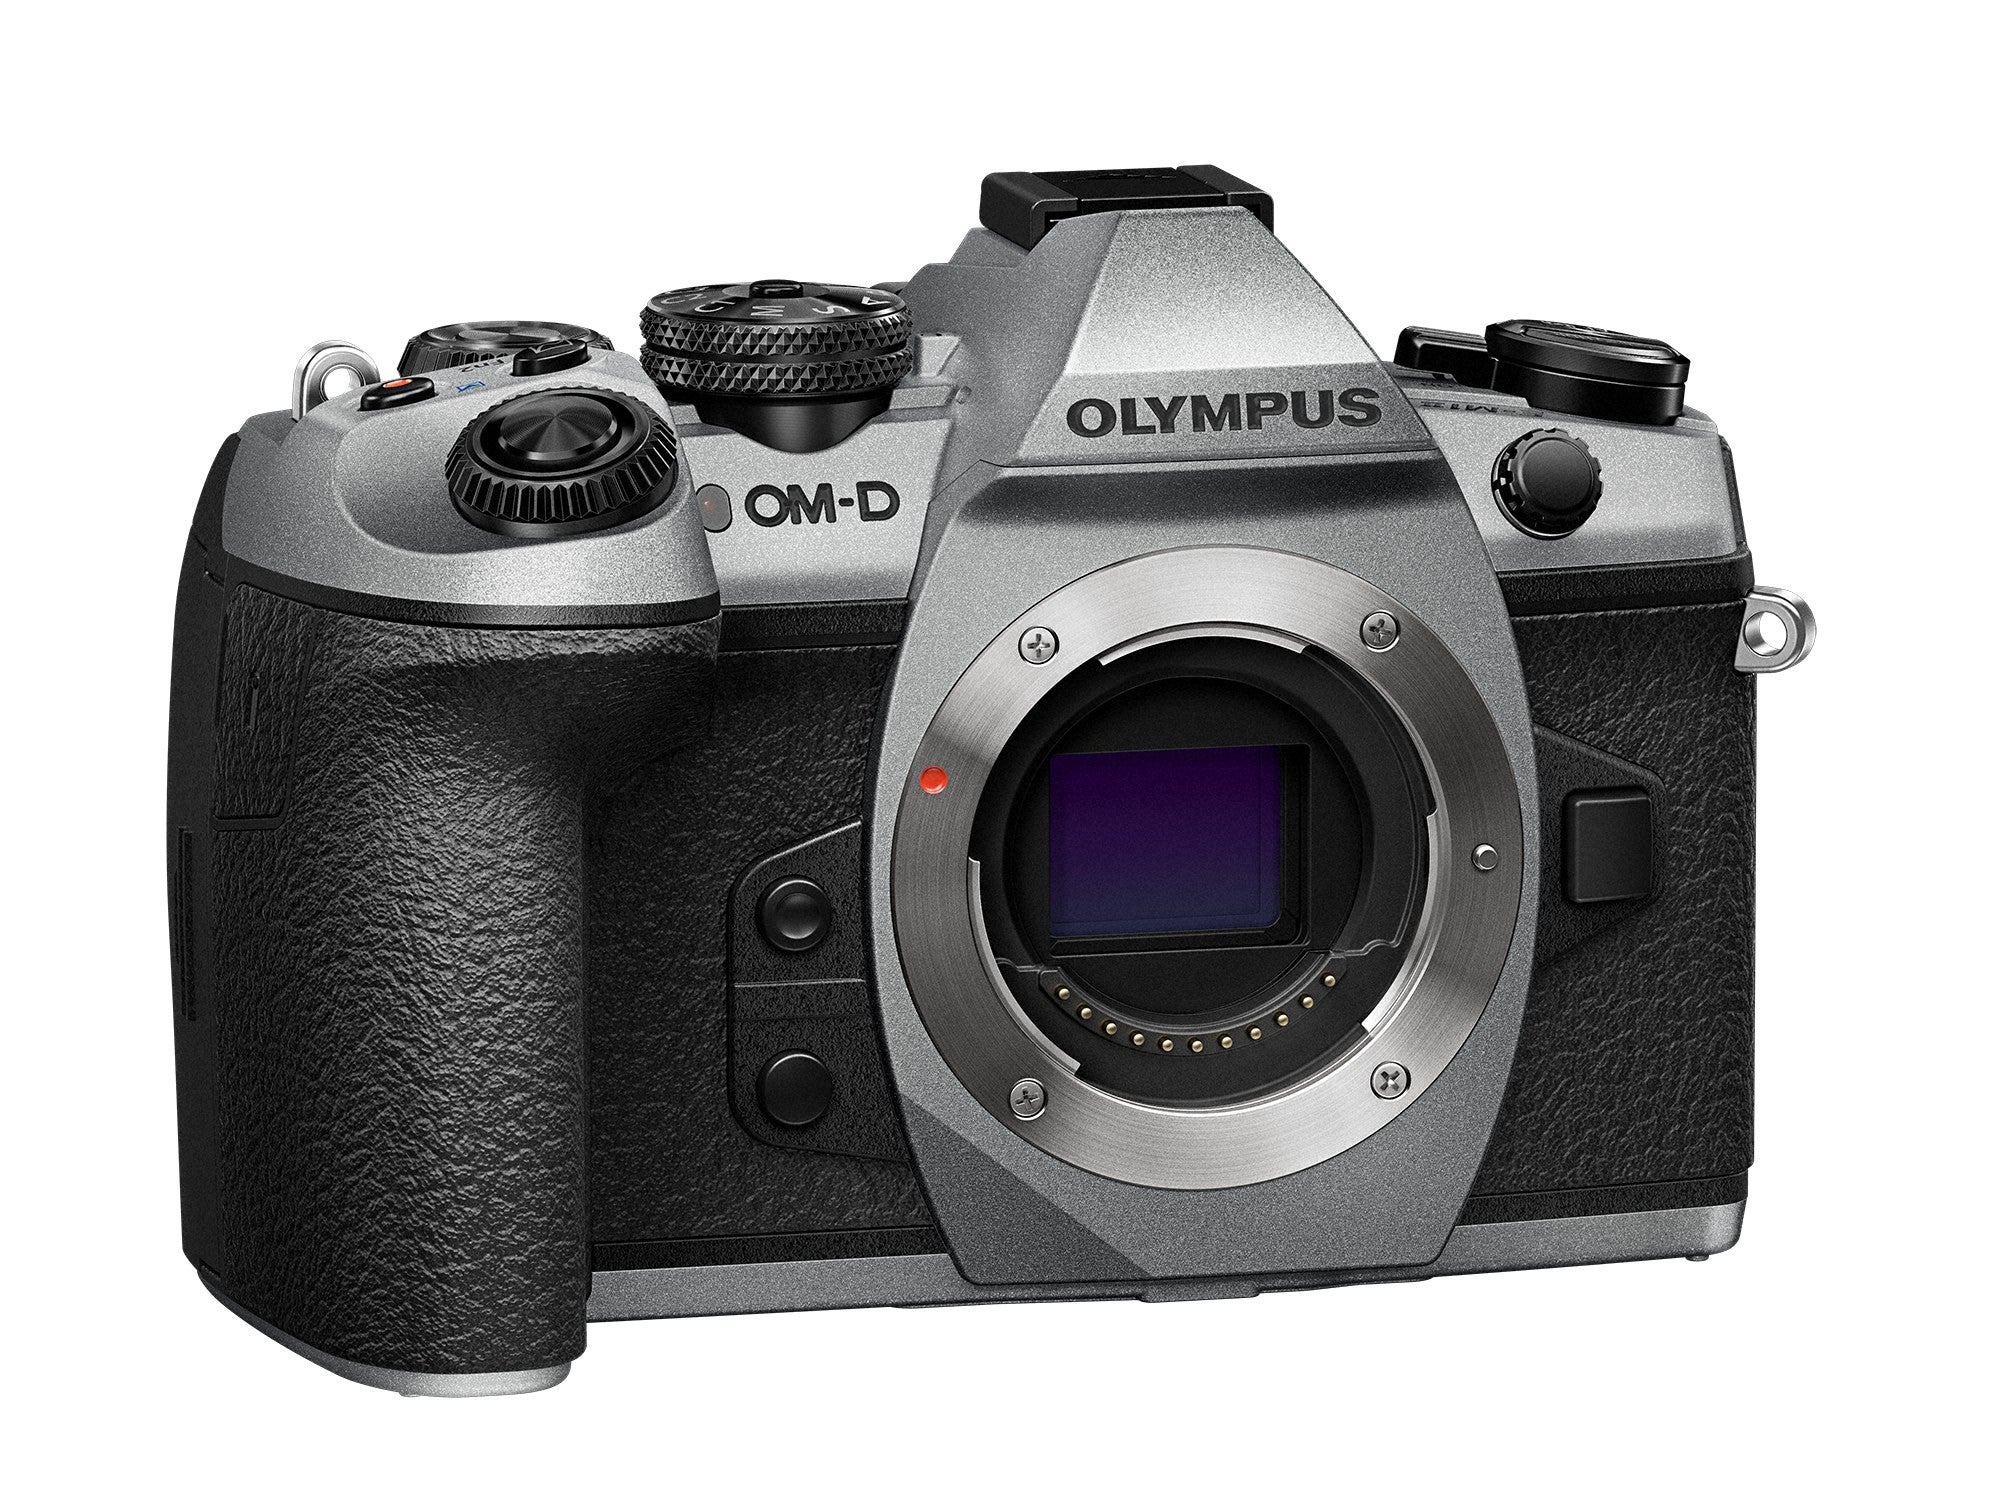 Apariencia Reprimir productos quimicos Olympus celebrates 100 years with a limited edition silver OM-D E-M1 Mark II  camera